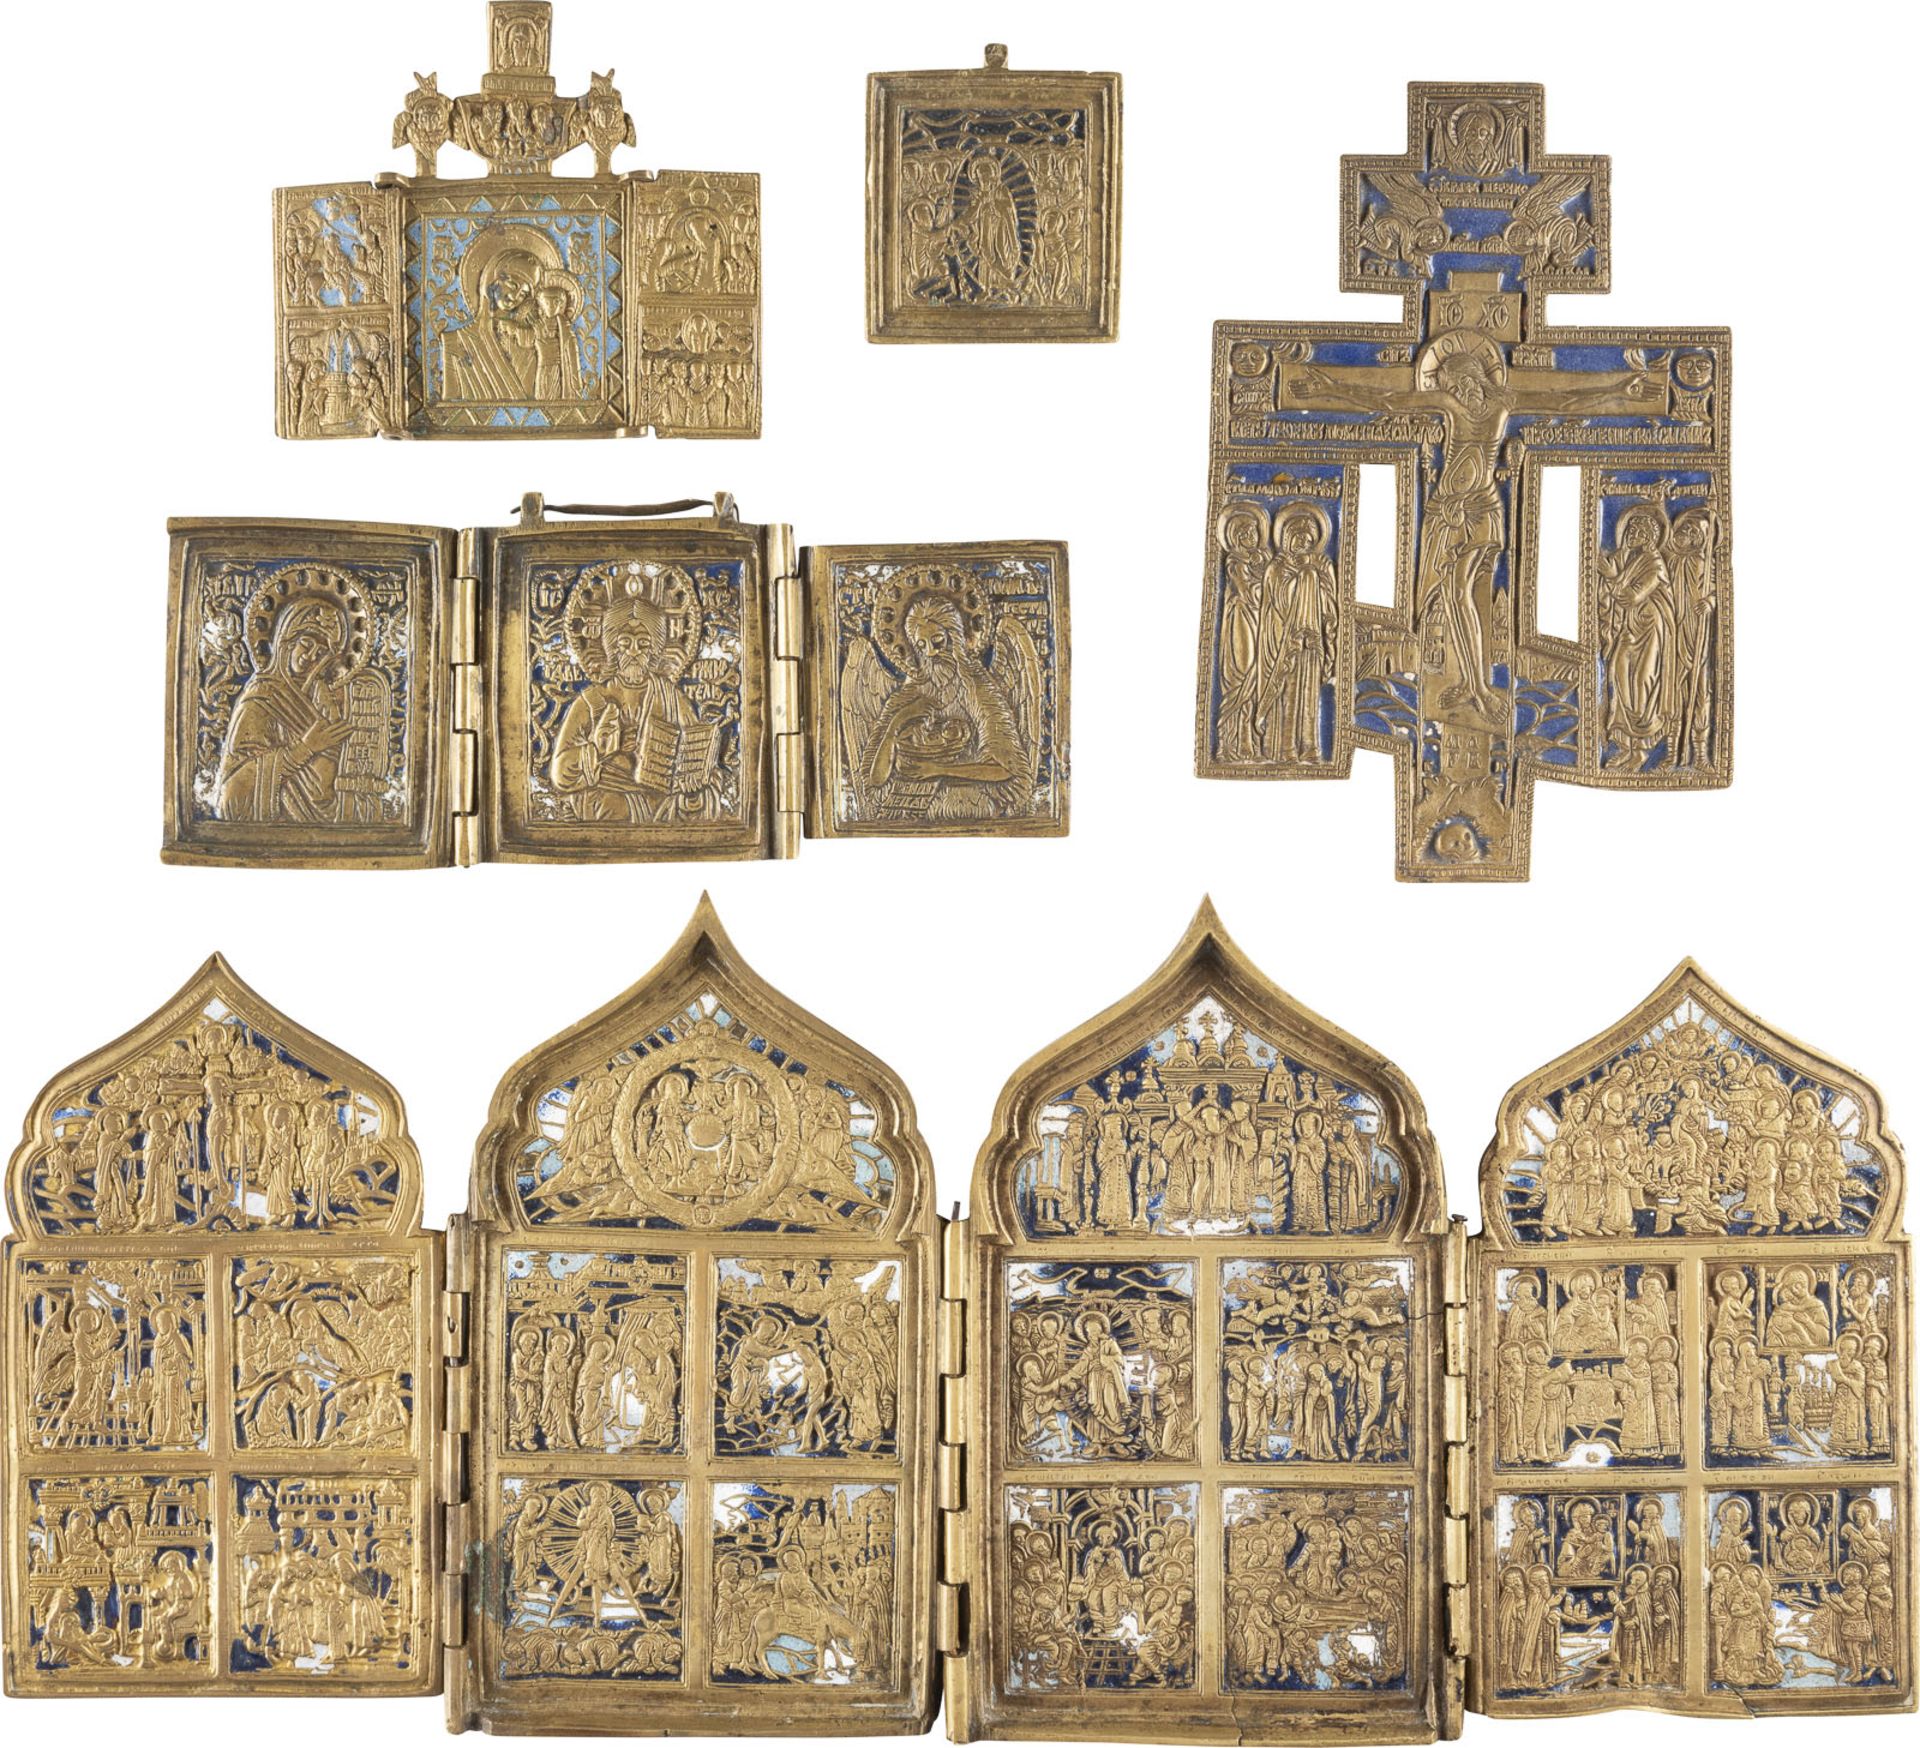 FIVE BRASS AND ENAMEL ICONS SHOWING FESTIVALS, THE CRUCIFIXION OF CHRIST, THE DEISIS AND